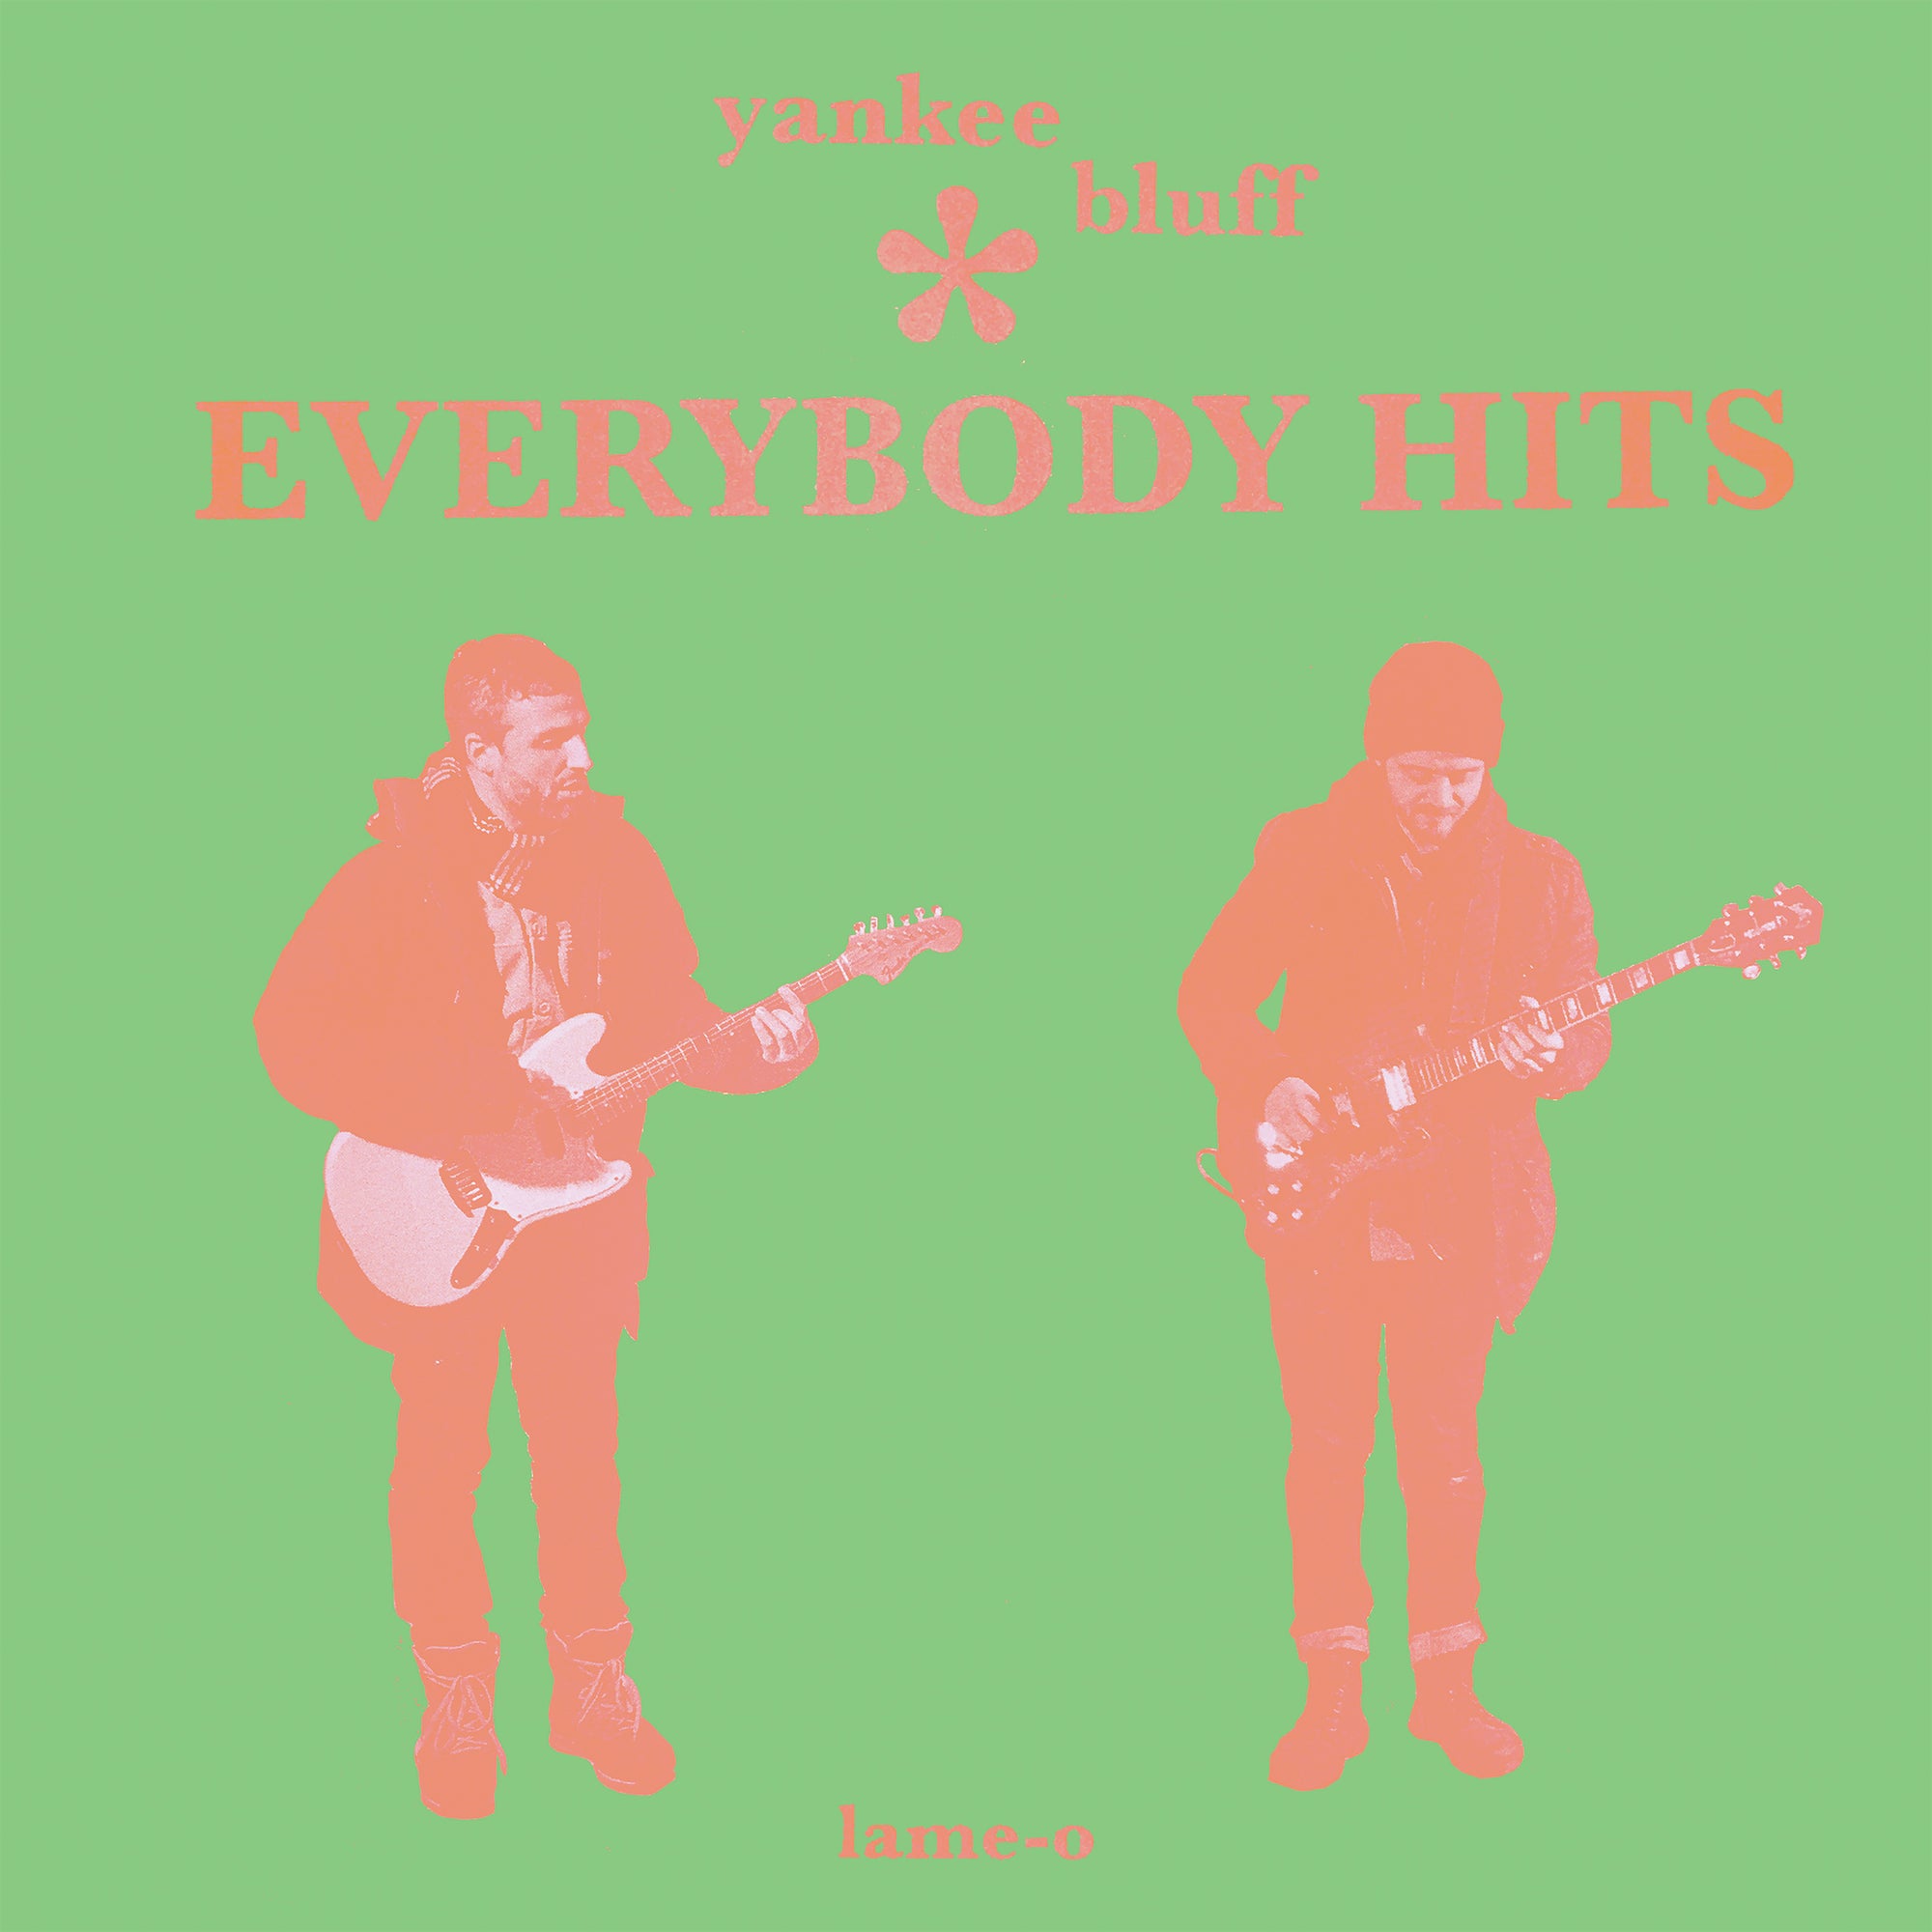 Two musicians, one playing an acoustic guitar and the other an electric guitar, are depicted in silhouette against a green background with the text "Yankee Bluff - Everybody Hits" above them. This indie jam is by Tandem Coffee Roasters.